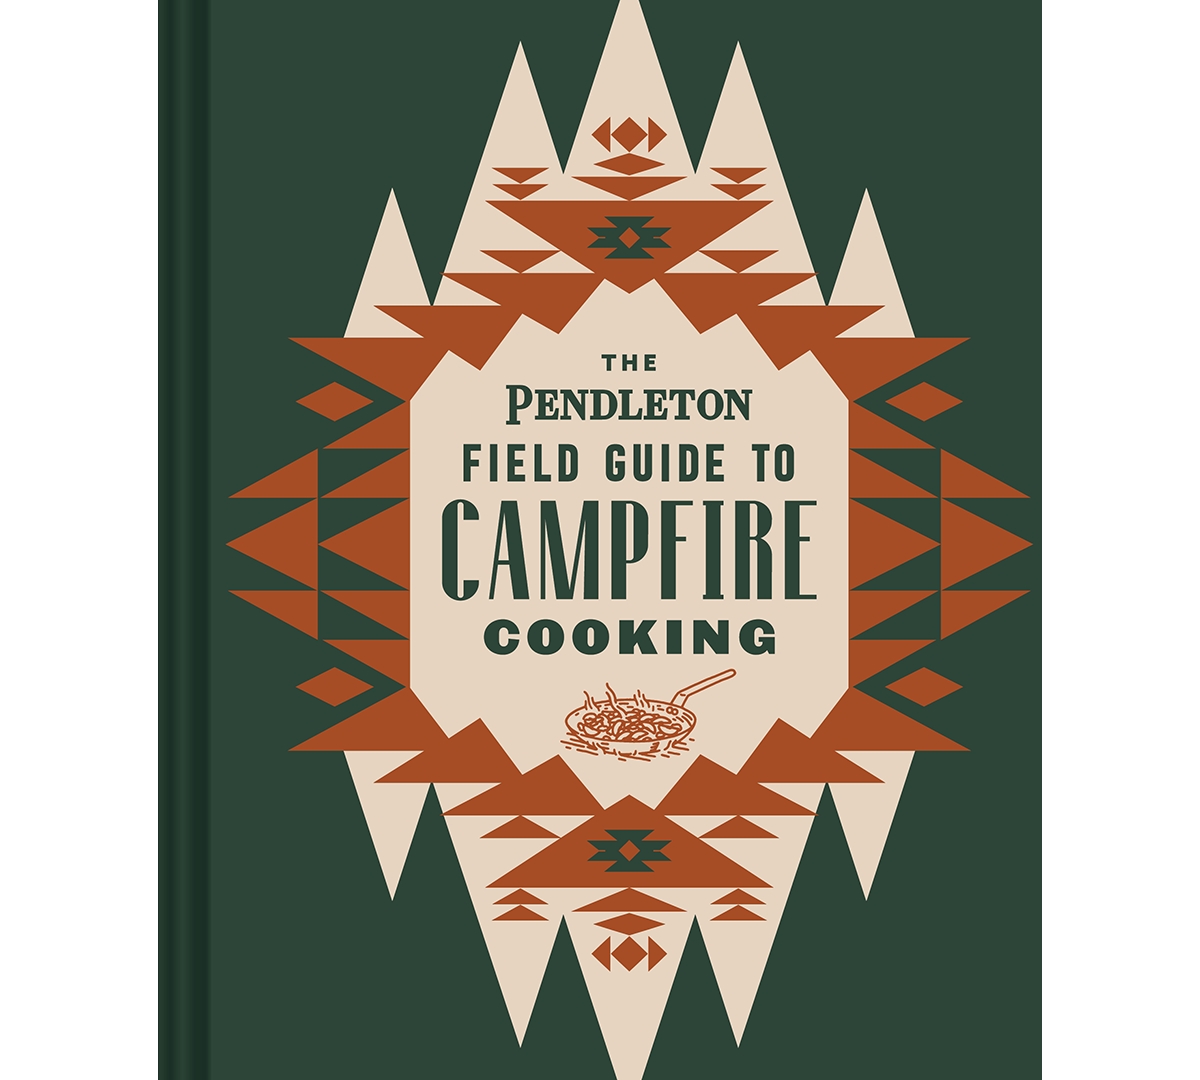 The Pendleton Field Guide to Campfire Cooking - Other